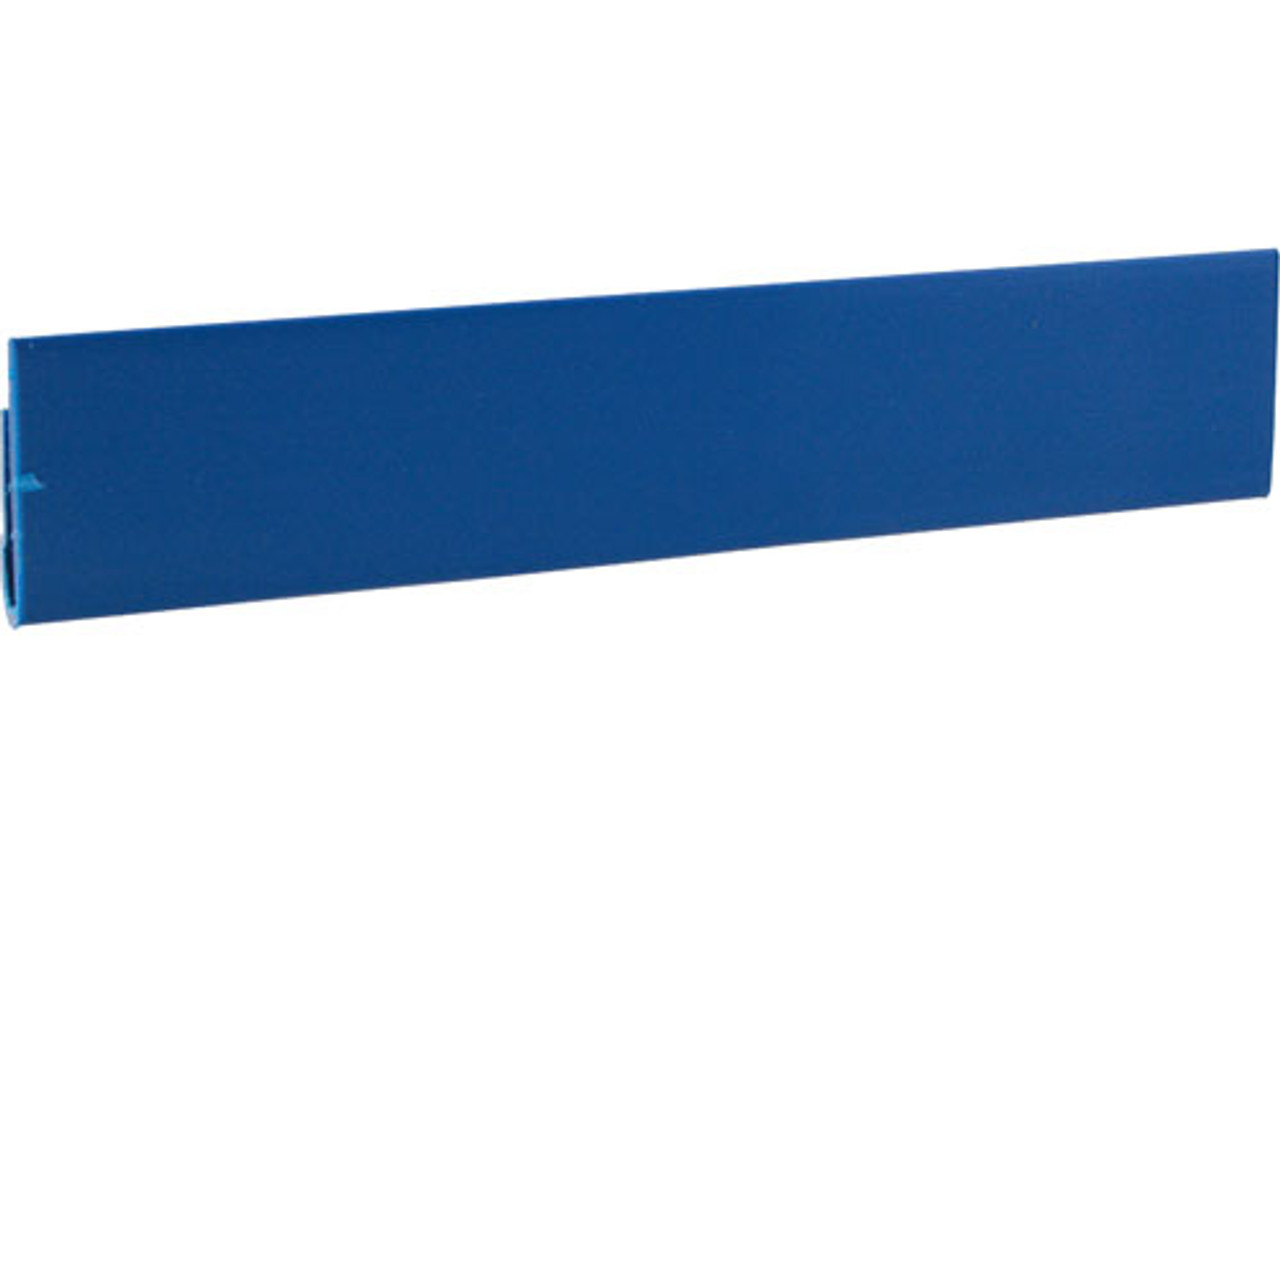 Shelf Marker 6In Blue - Replacement Part For Intermetro CSM6B